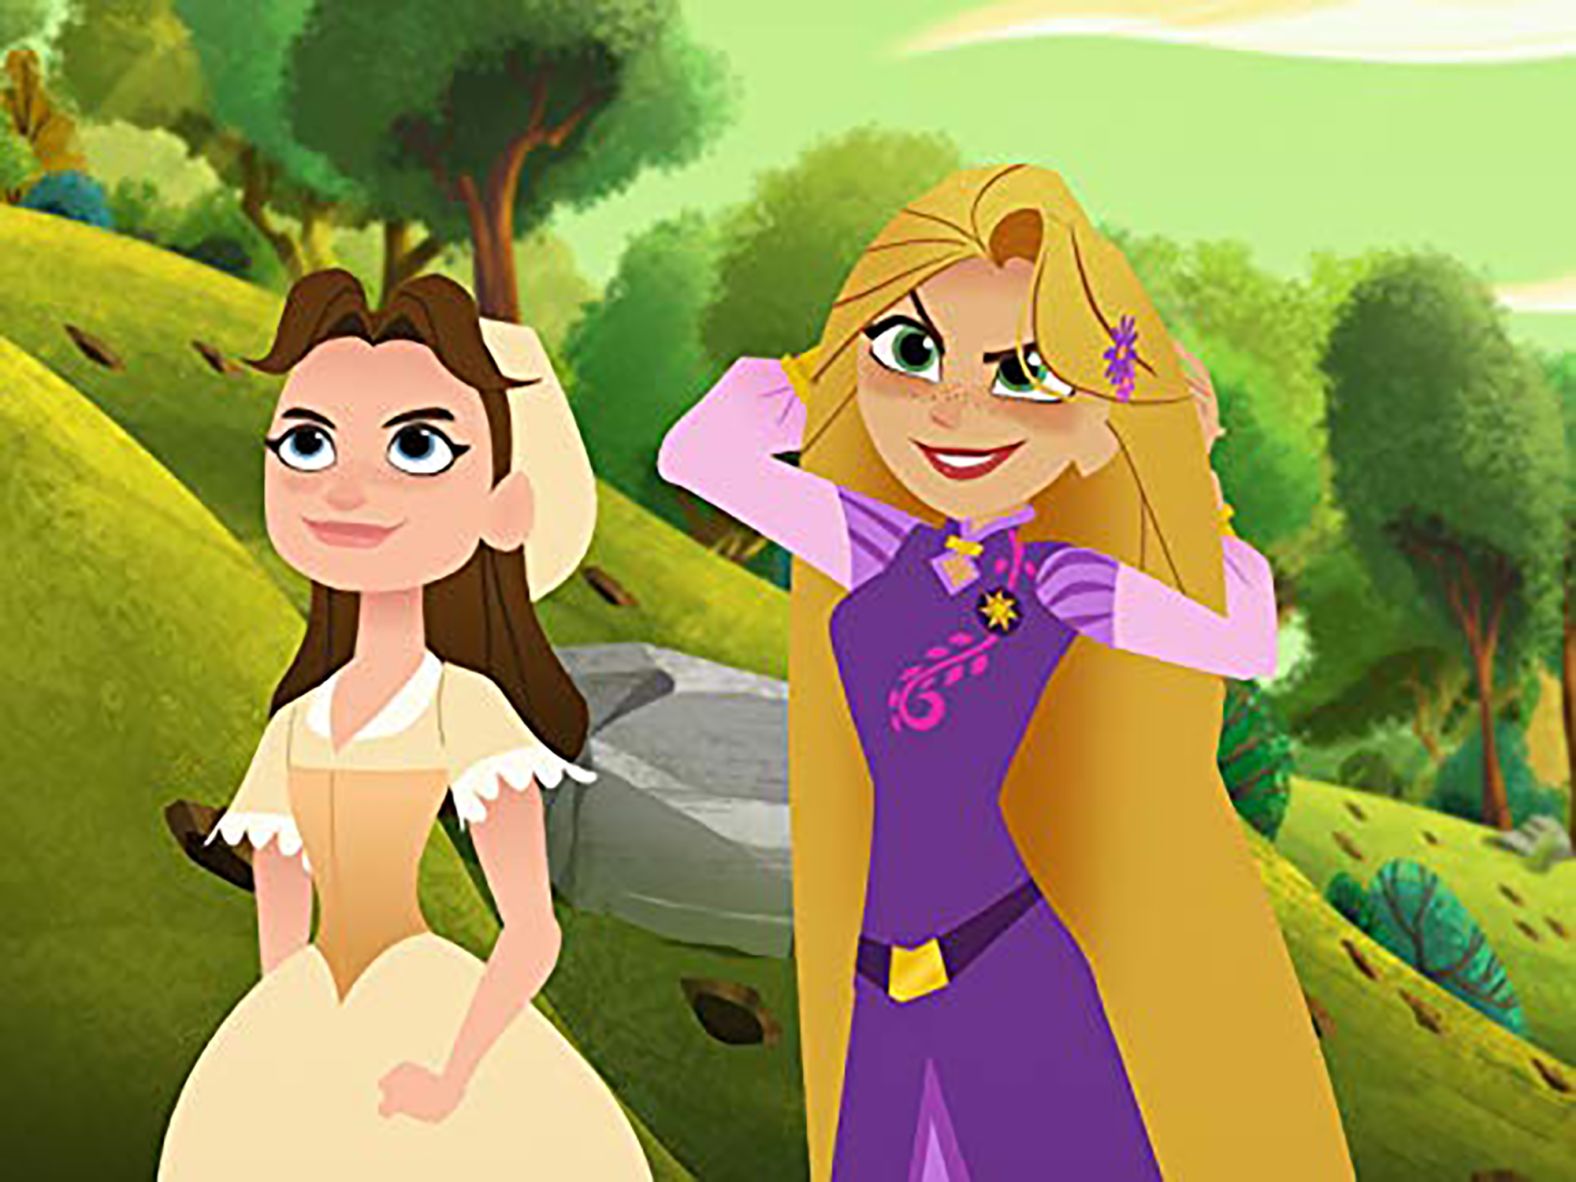 <strong>"Disney Rapunzel's Tangled Adventure" Season 3</strong>: Rapunzel's happily ever after is harrier than she imagined. While Eugen adapts to the new life of luxury, Rapunzel struggles to adjust to Corona. But she finds escape with her firiend, and handmaiden, Cassandra. <strong>(Disney+)</strong>